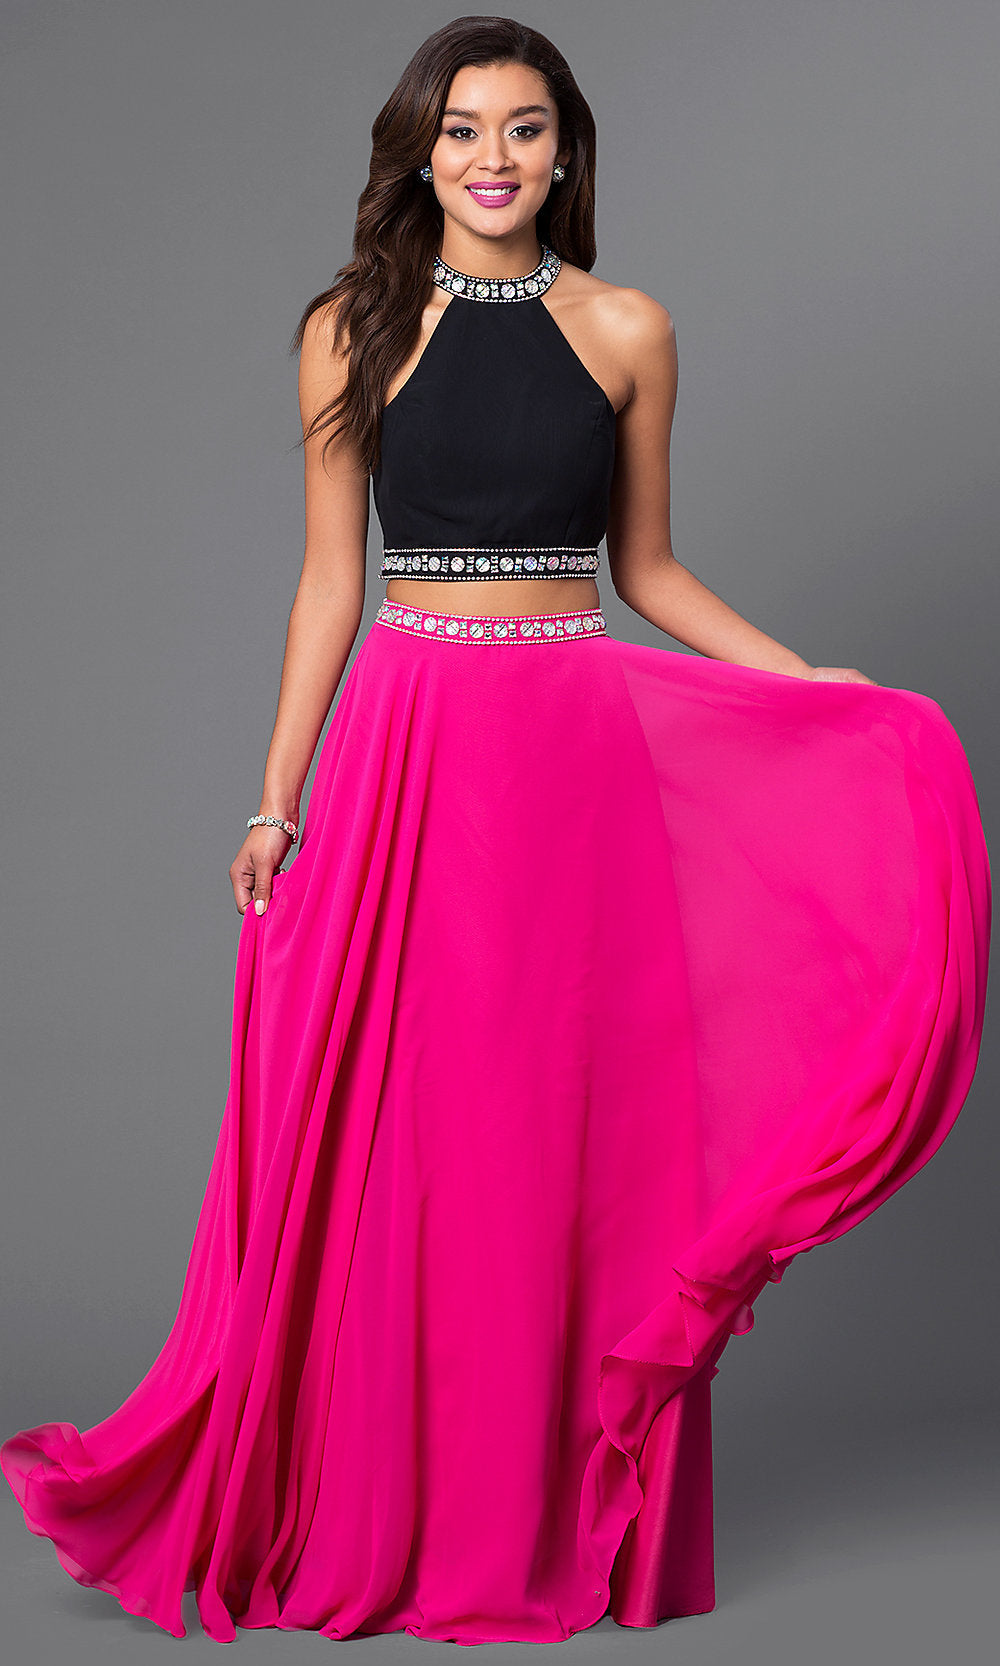 Fuchsia/Black Long Two-Piece Formal Gown with Jewel Accents